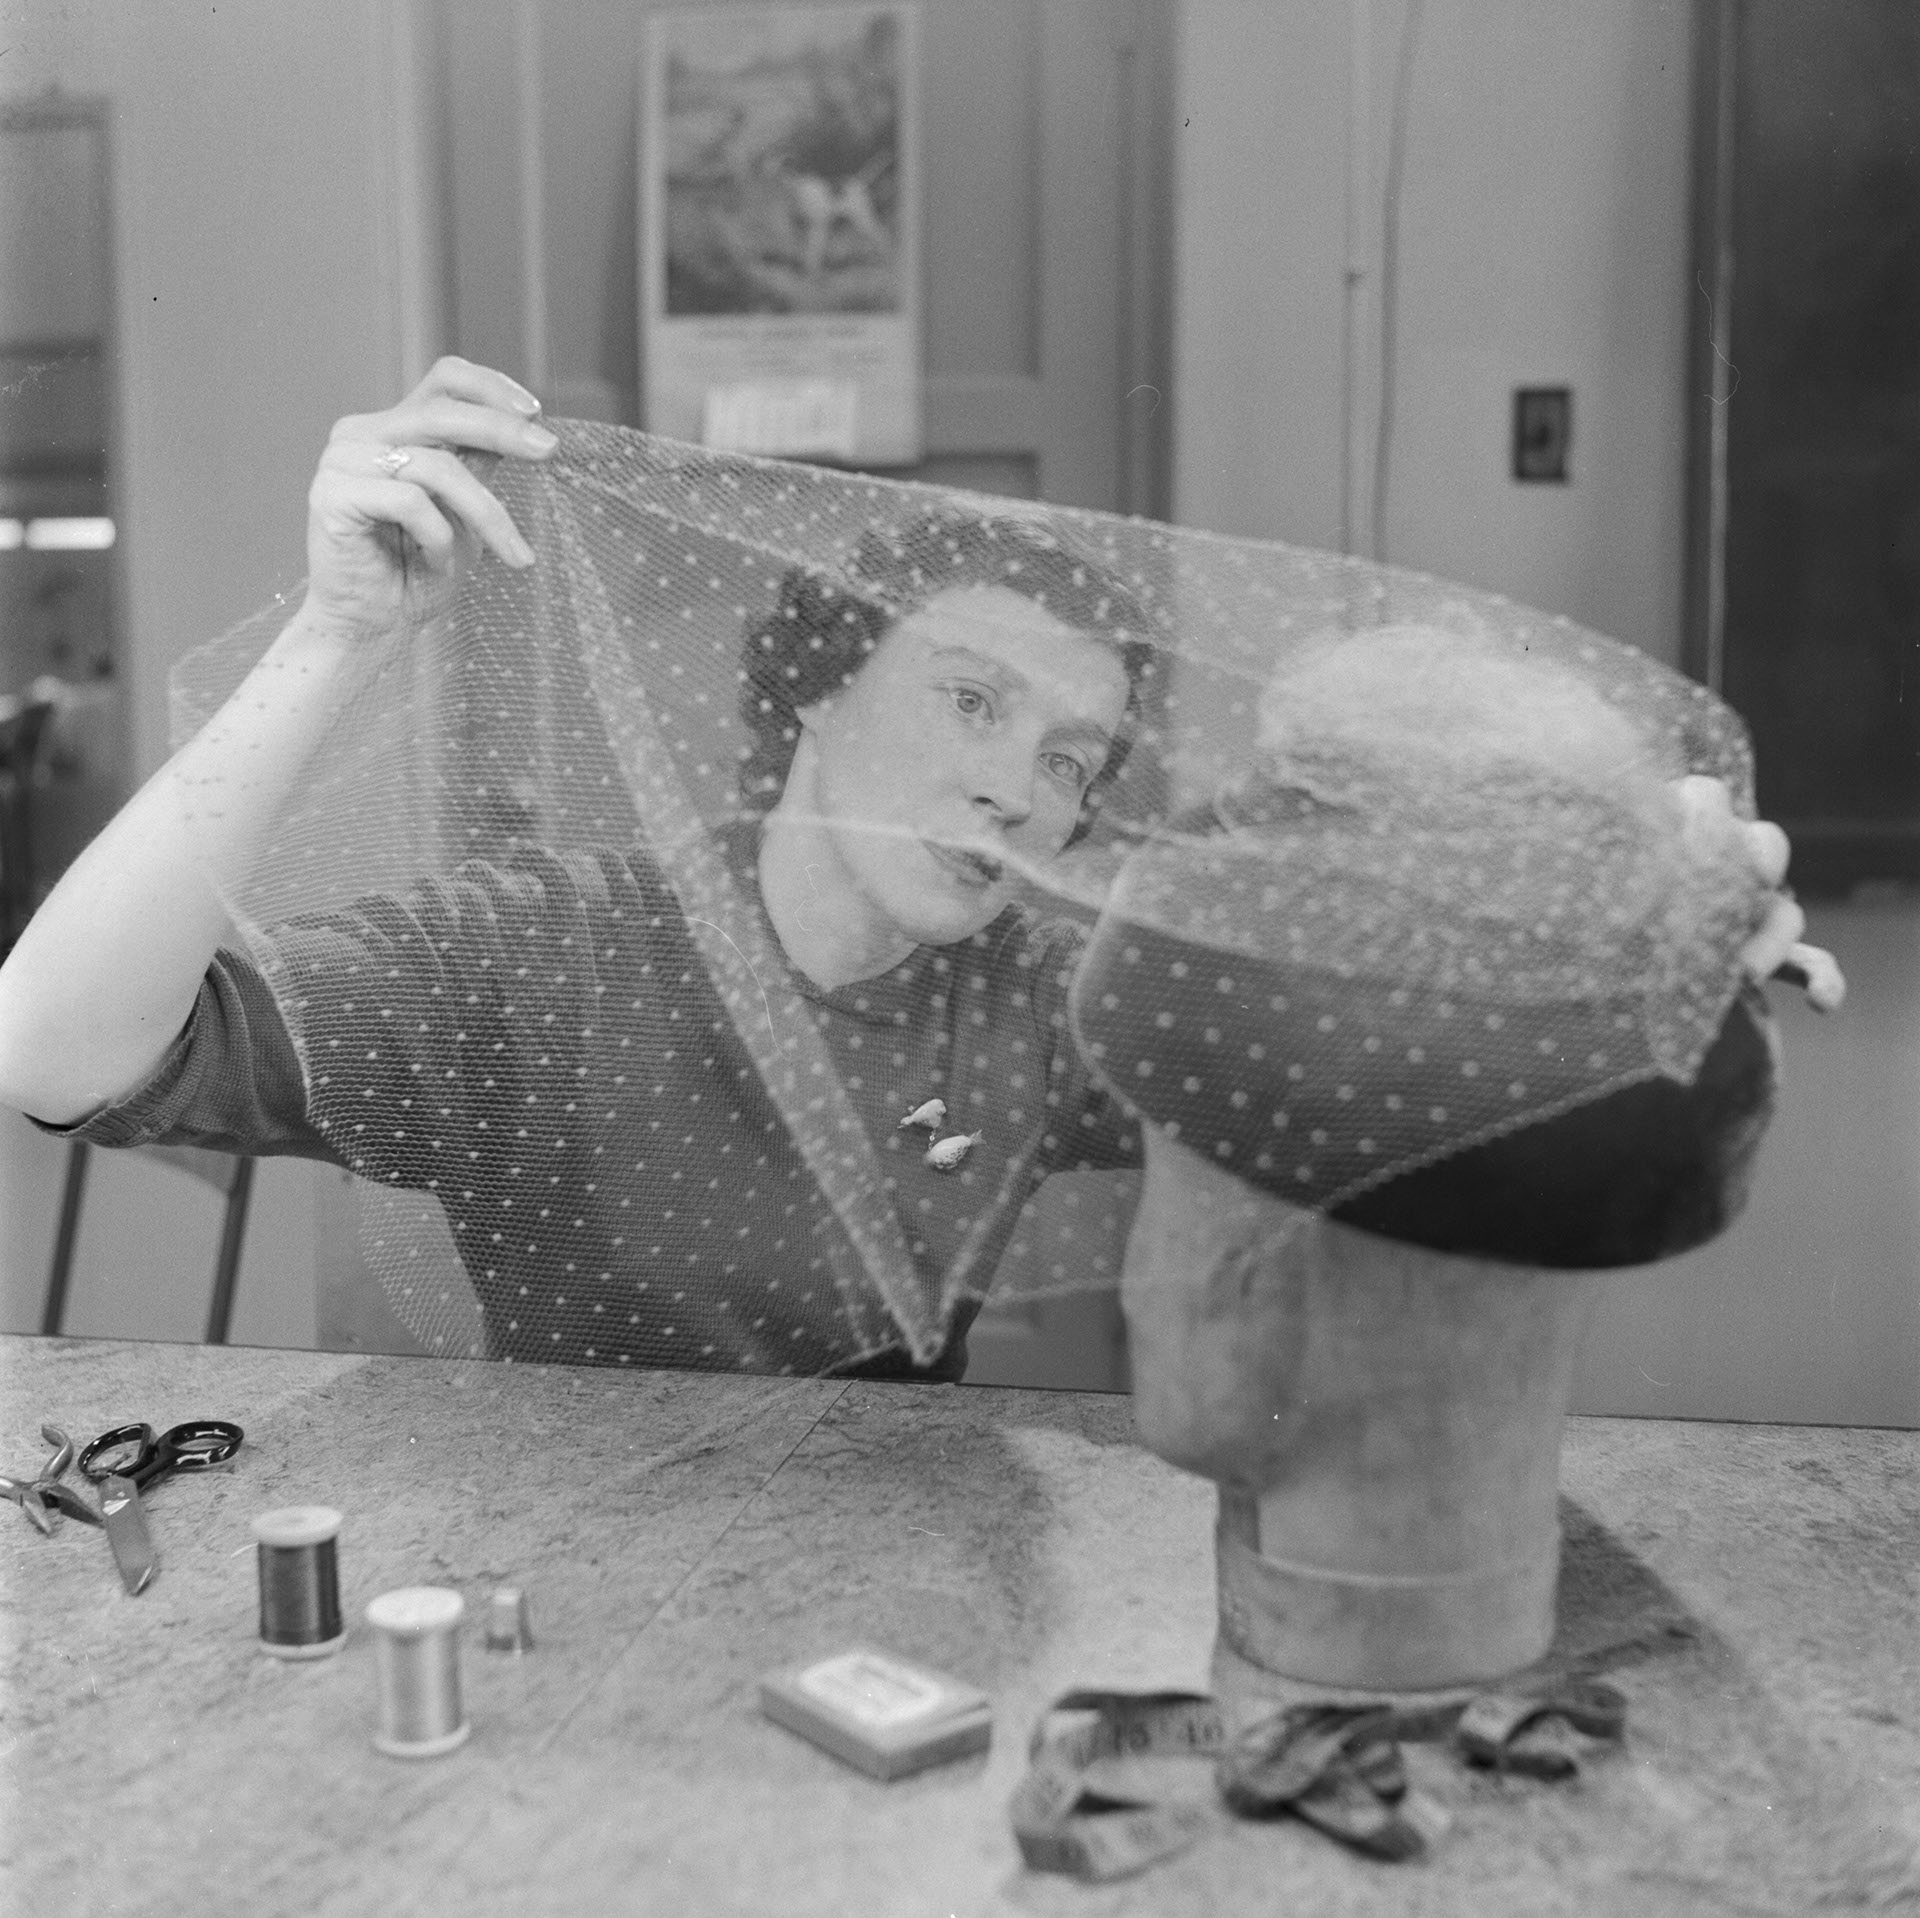 Woman at millinery school working on a hat